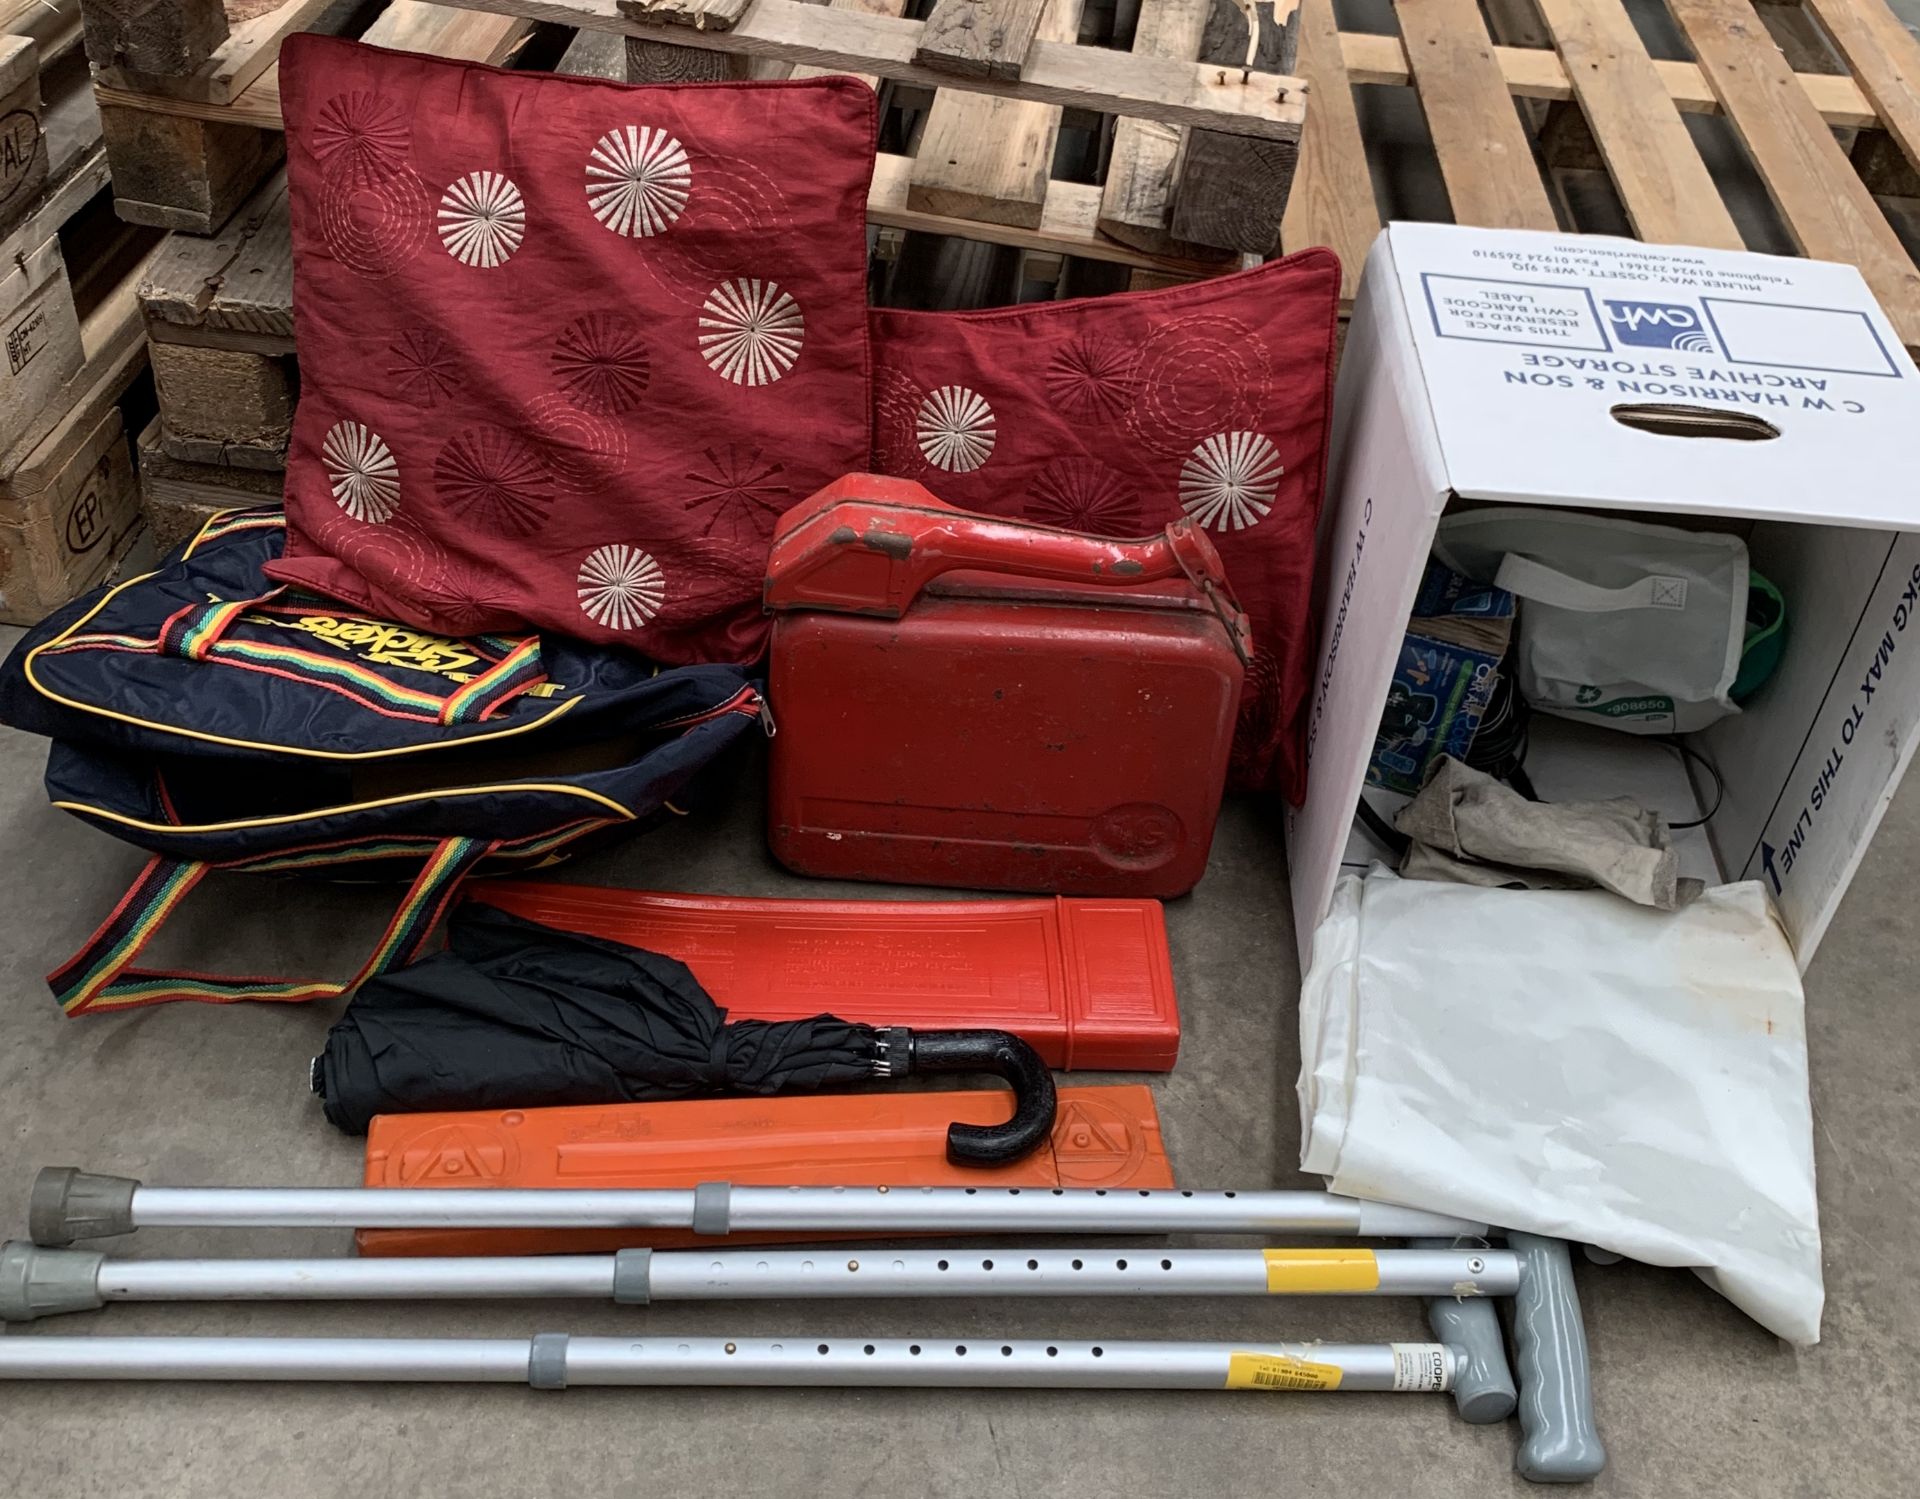 Contents to part of pallet - metal petrol can, warning triangle, walking stick,